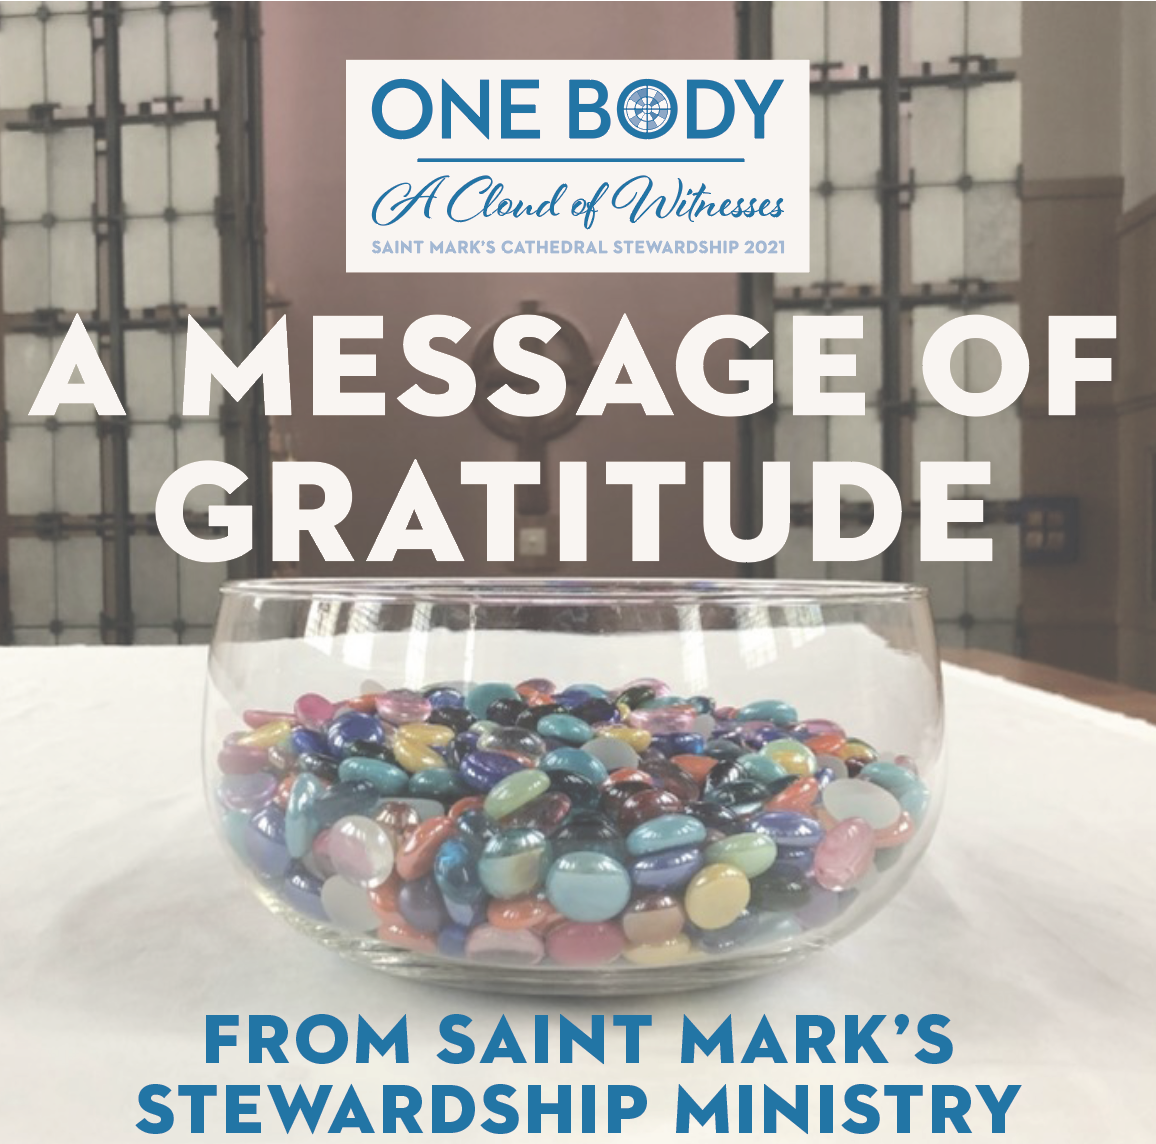 A Message of Gratitude from the Saint Mark’s Stewardship Ministry